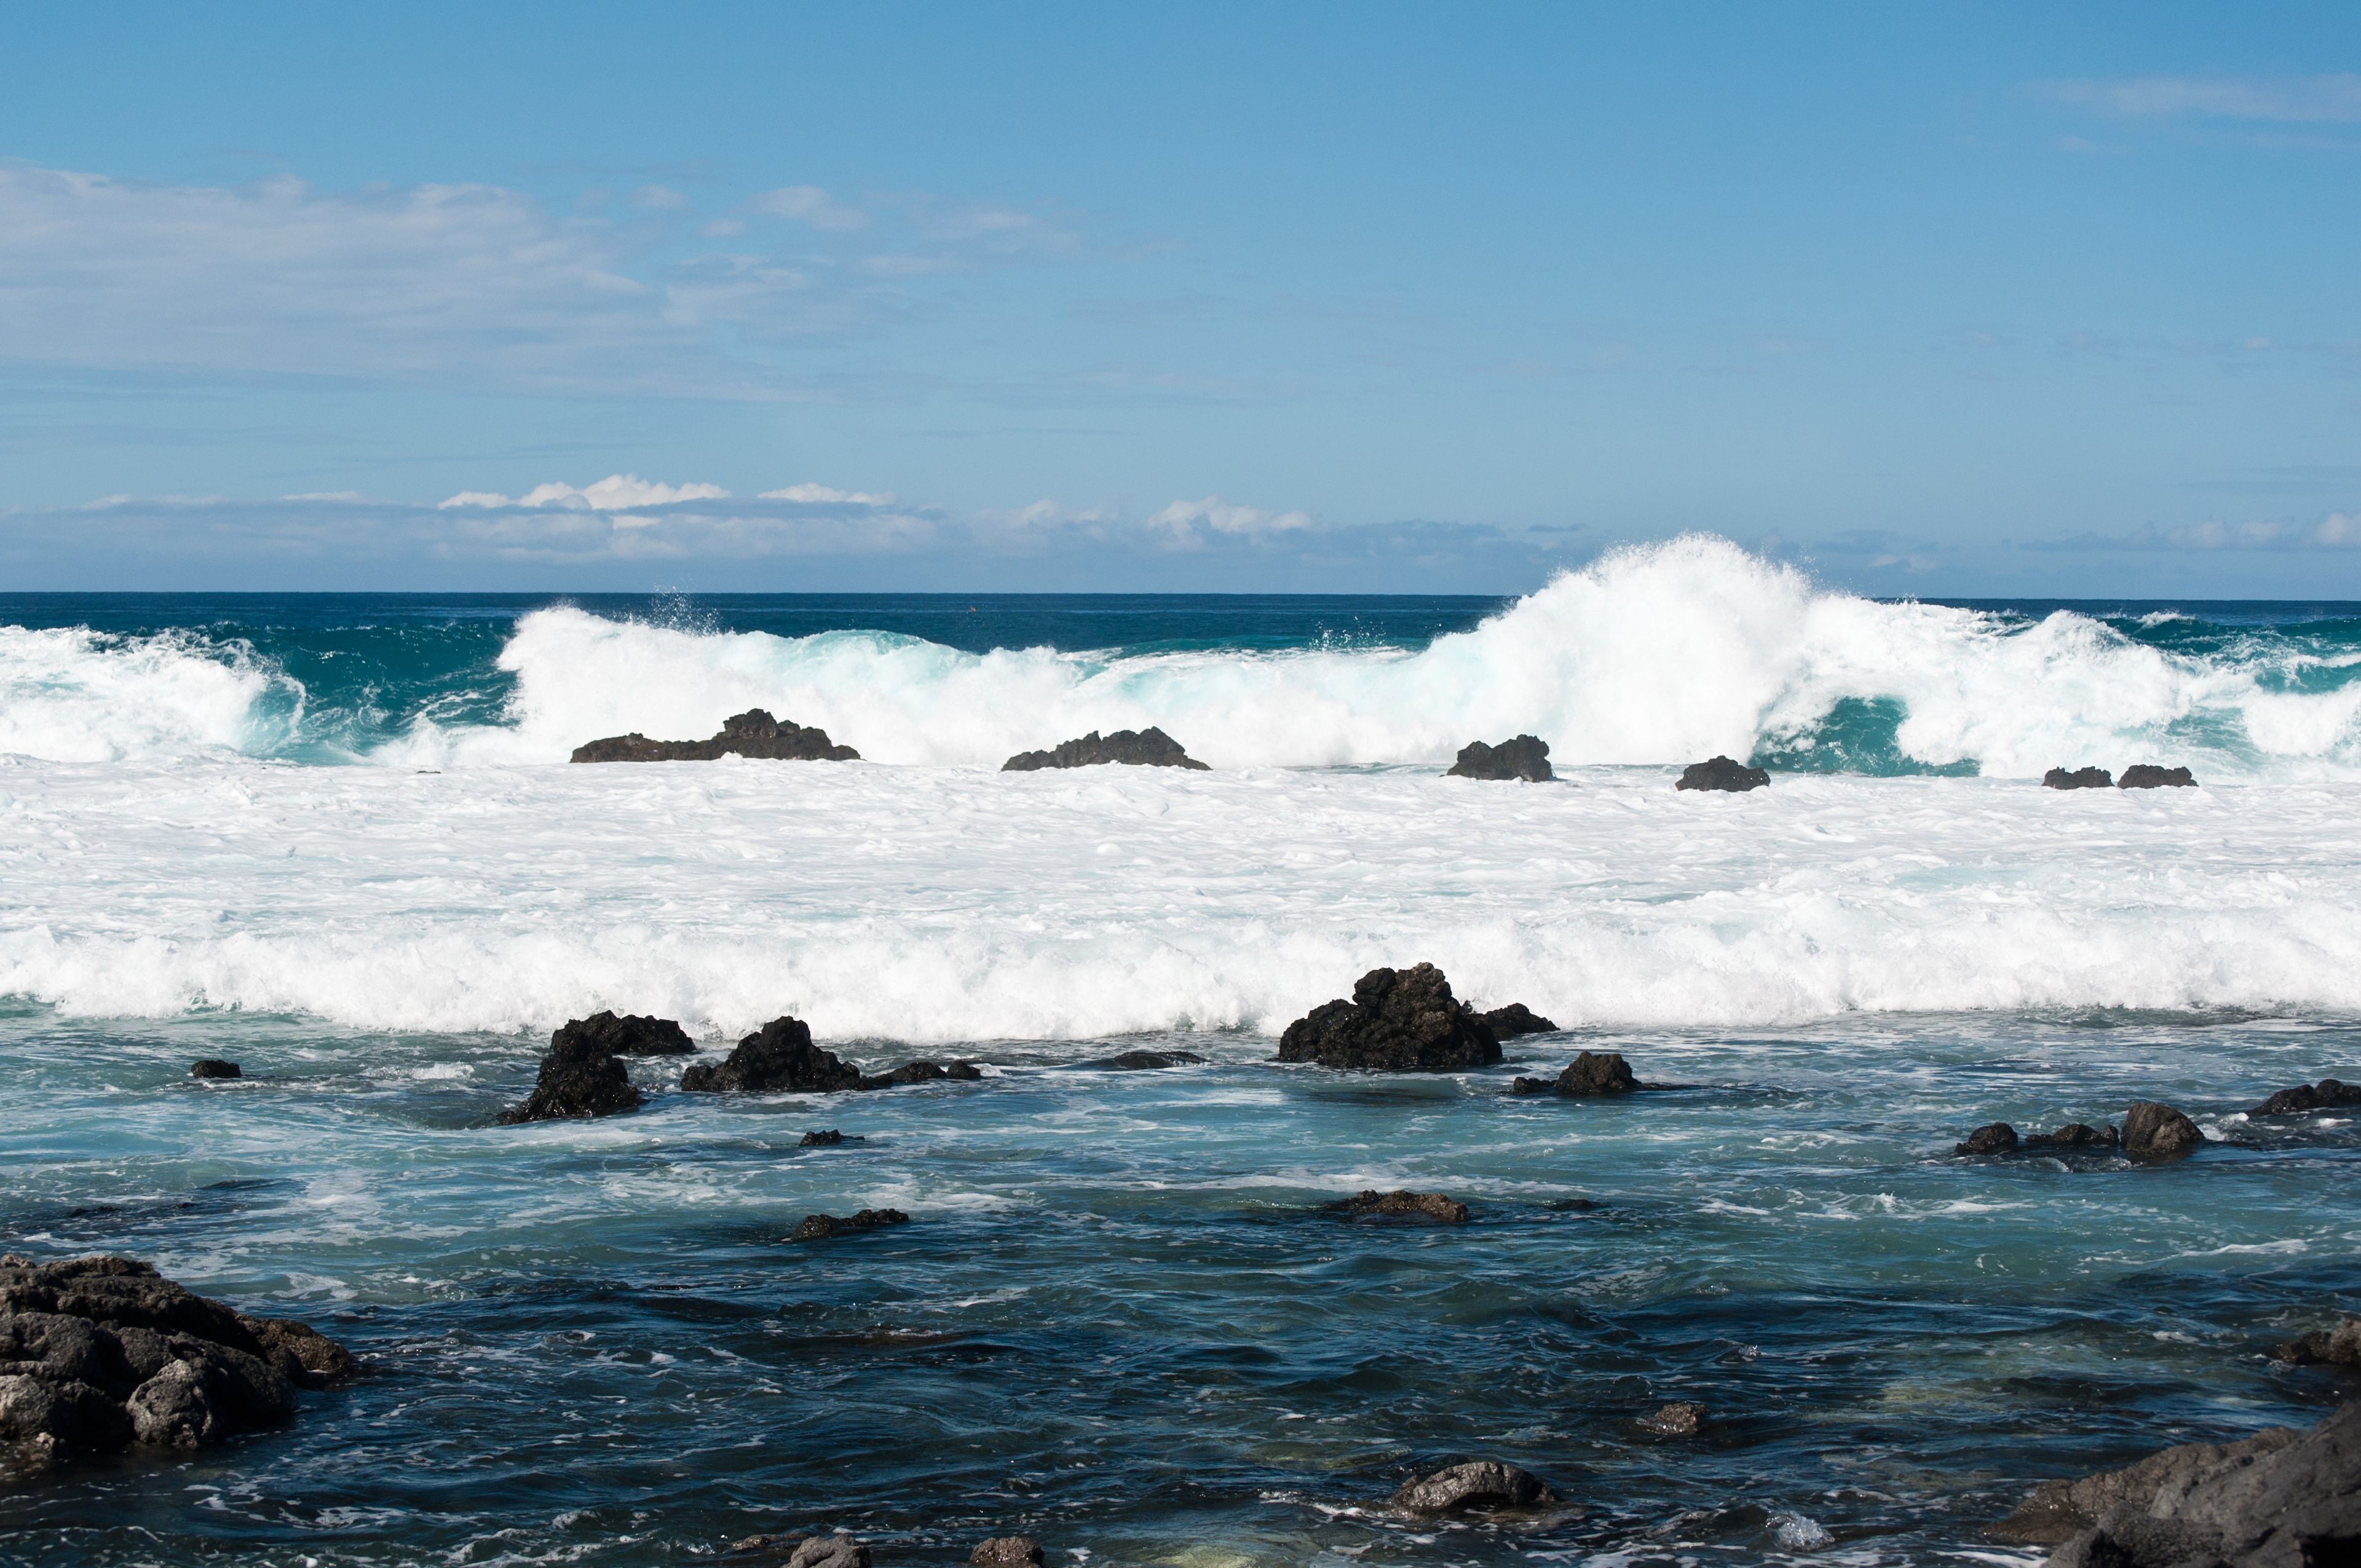 Rocks rise above the waterline in Hawaii.